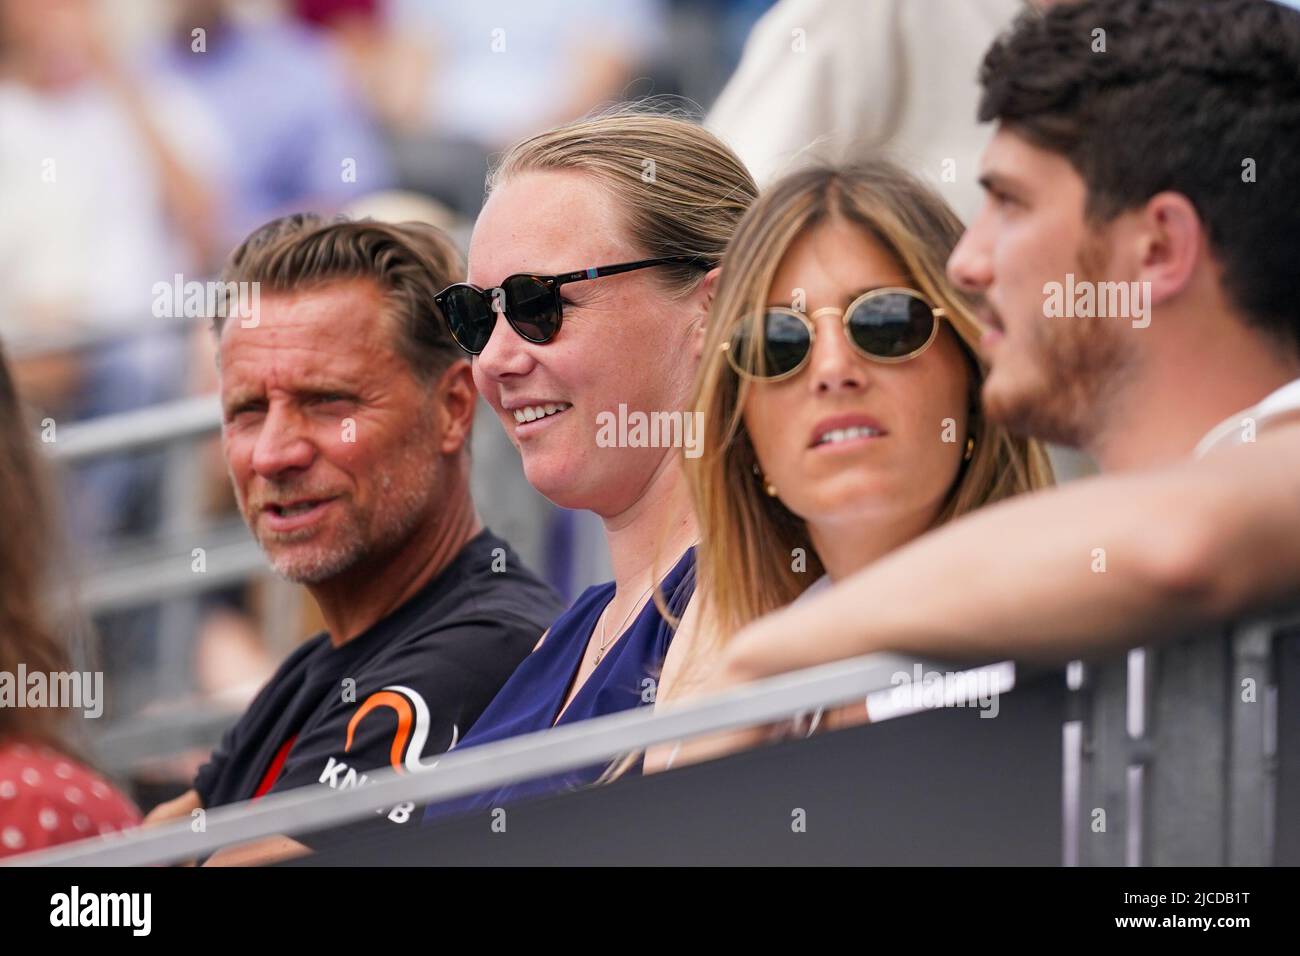 'S-HERTOGENBOSCH, NETHERLANDS - JUNE 12: Kiki Bertens watches from the stands during the Mens Singles Final match between Daniil Medvedev of Russia and Tim van Rijthoven of the Netherlands at the Autotron on June 12, 2022 in 's-Hertogenbosch, Netherlands (Photo by Joris Verwijst/BSR Agency) Stock Photo